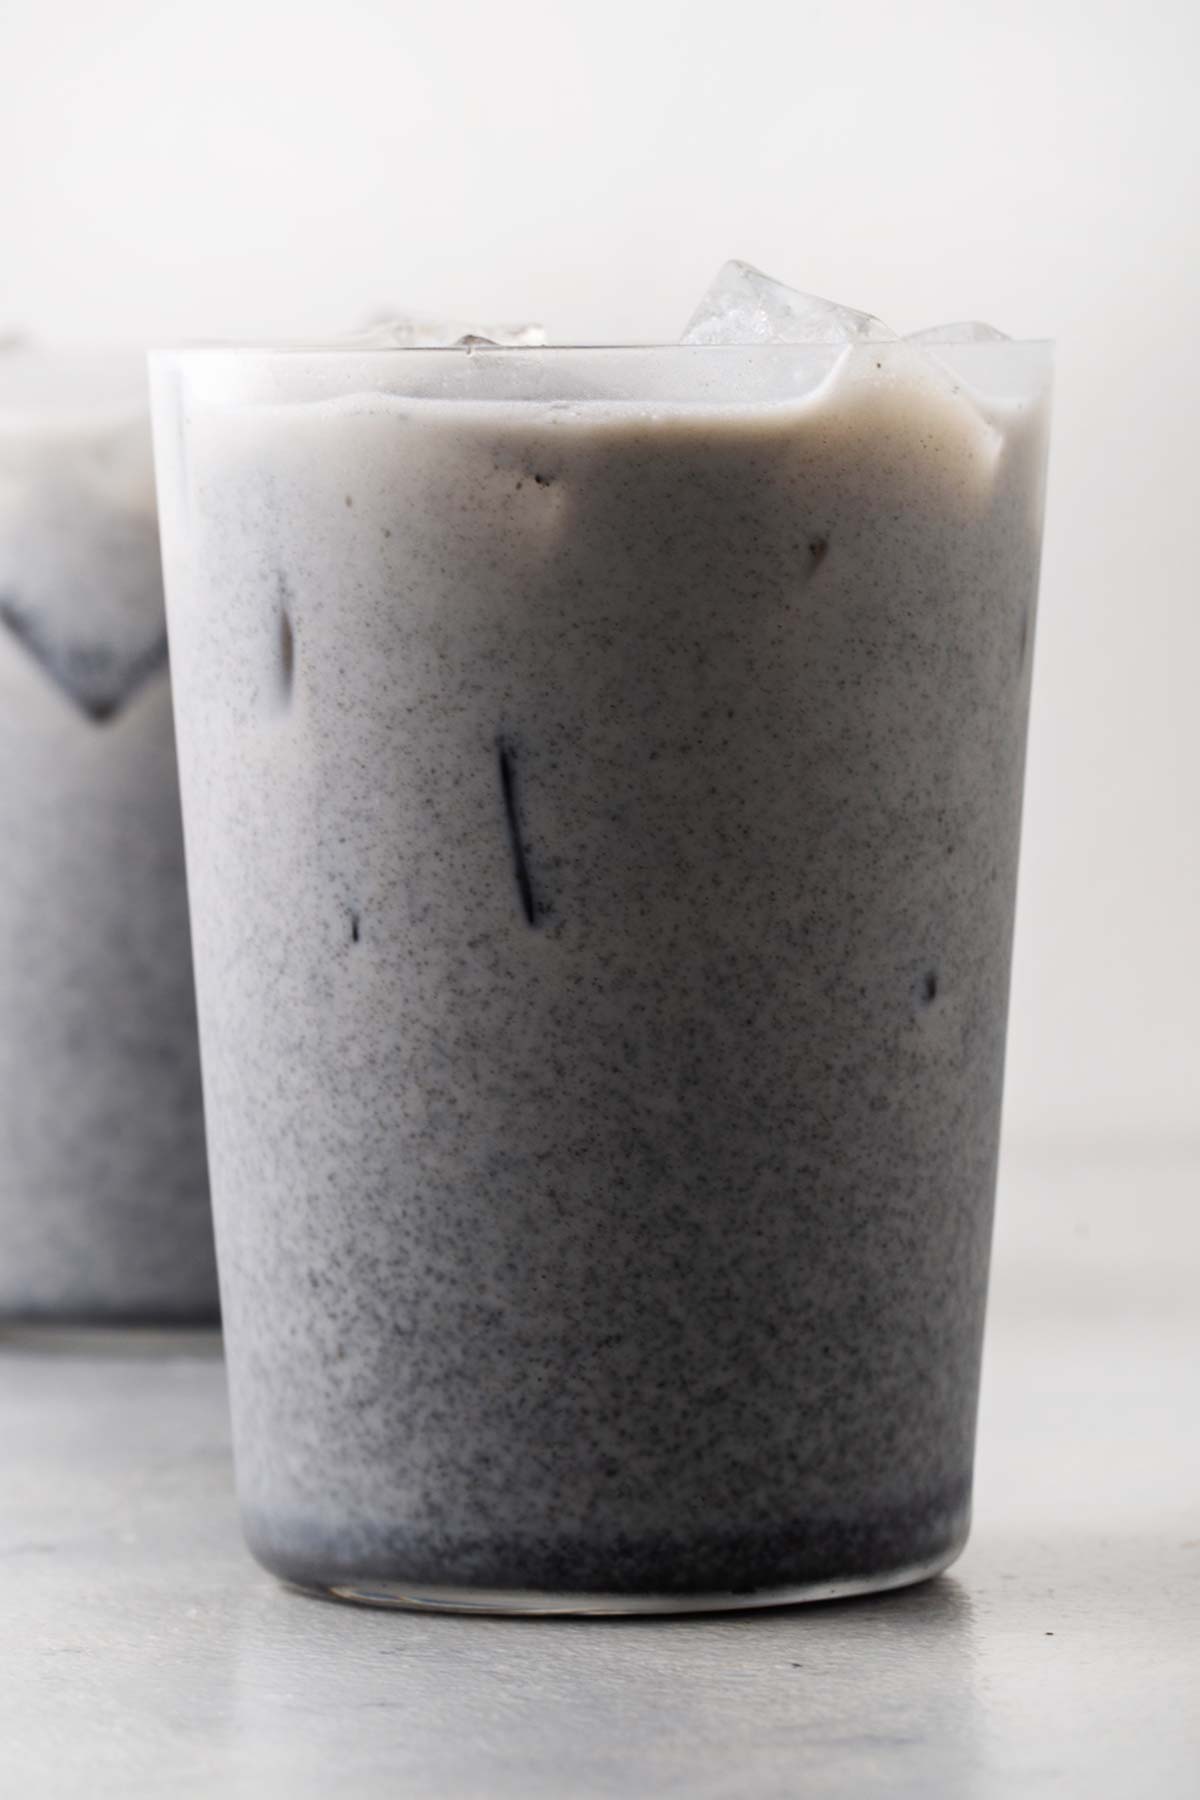 Iced Black Sesame Latte in a clear glass.